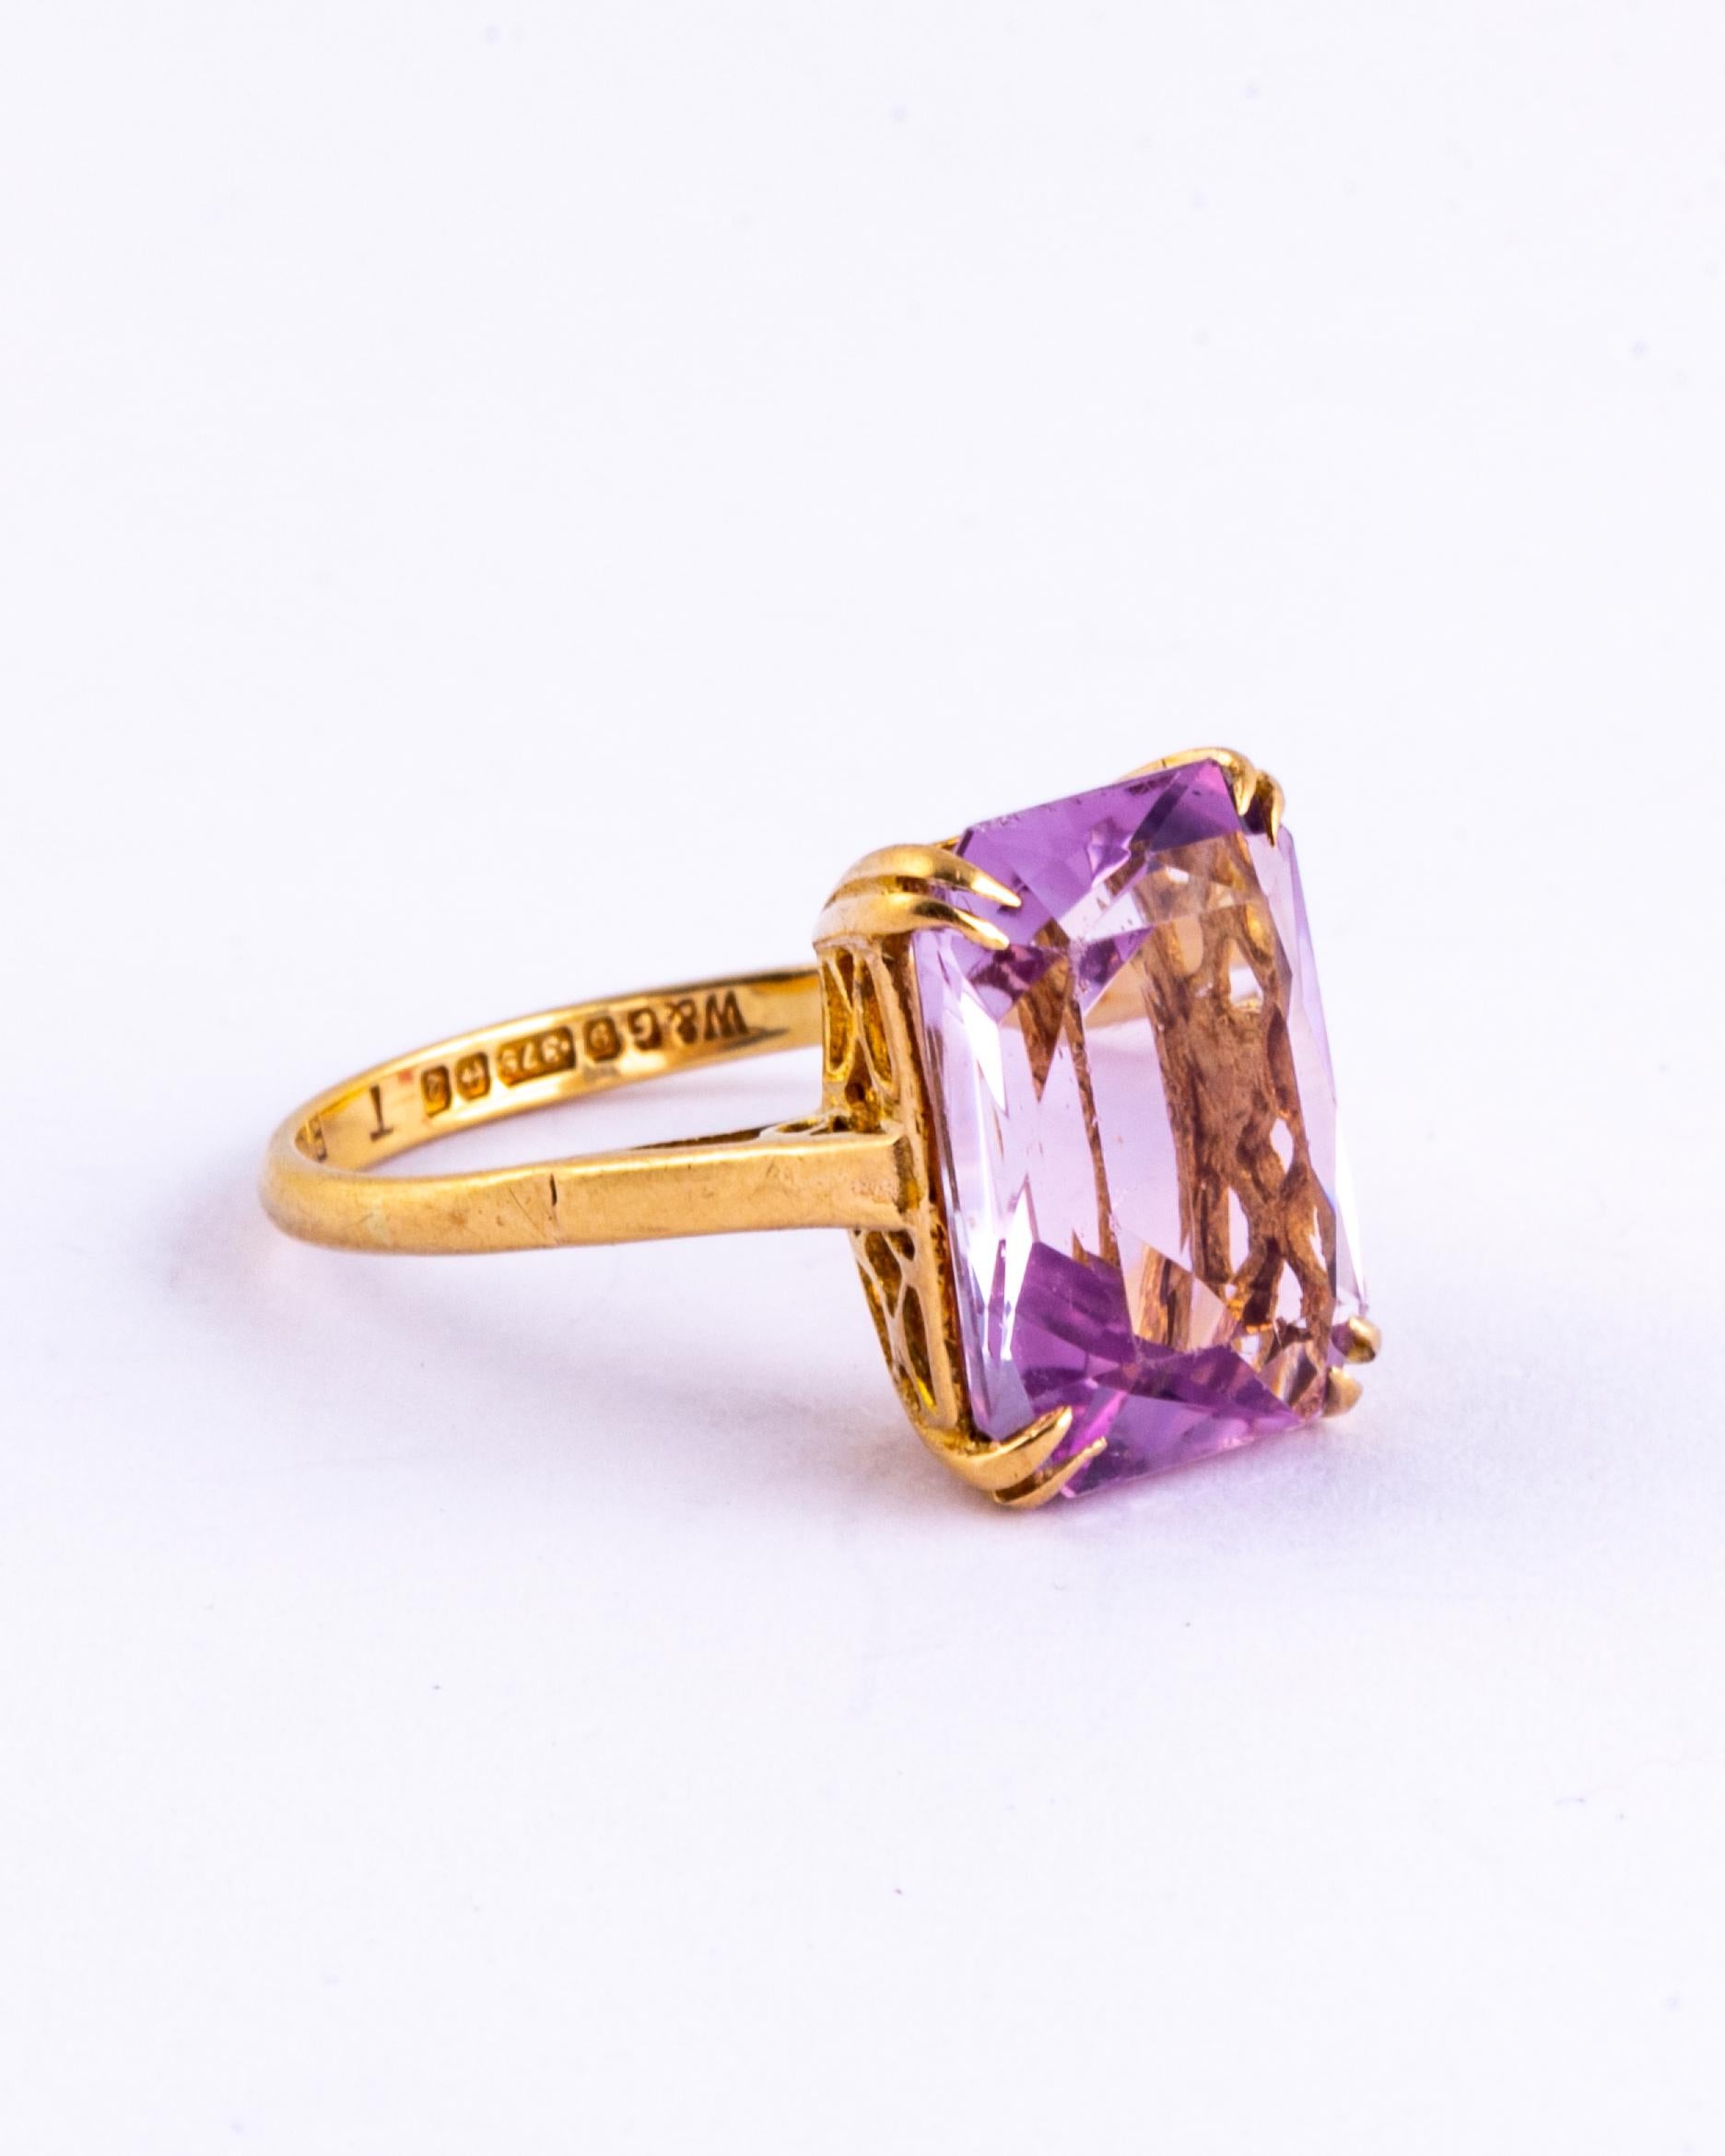 The amethyst set up high upon this ring is a gorgeous pale purple colour held in double claws. Modelled in 9carat gold and made in Birmingham, England. 

Ring Size: N or 6 3/4
Stone Dimensions: 19x10mm 
Height Off Finger: 7mm 

Weight: 3.8g